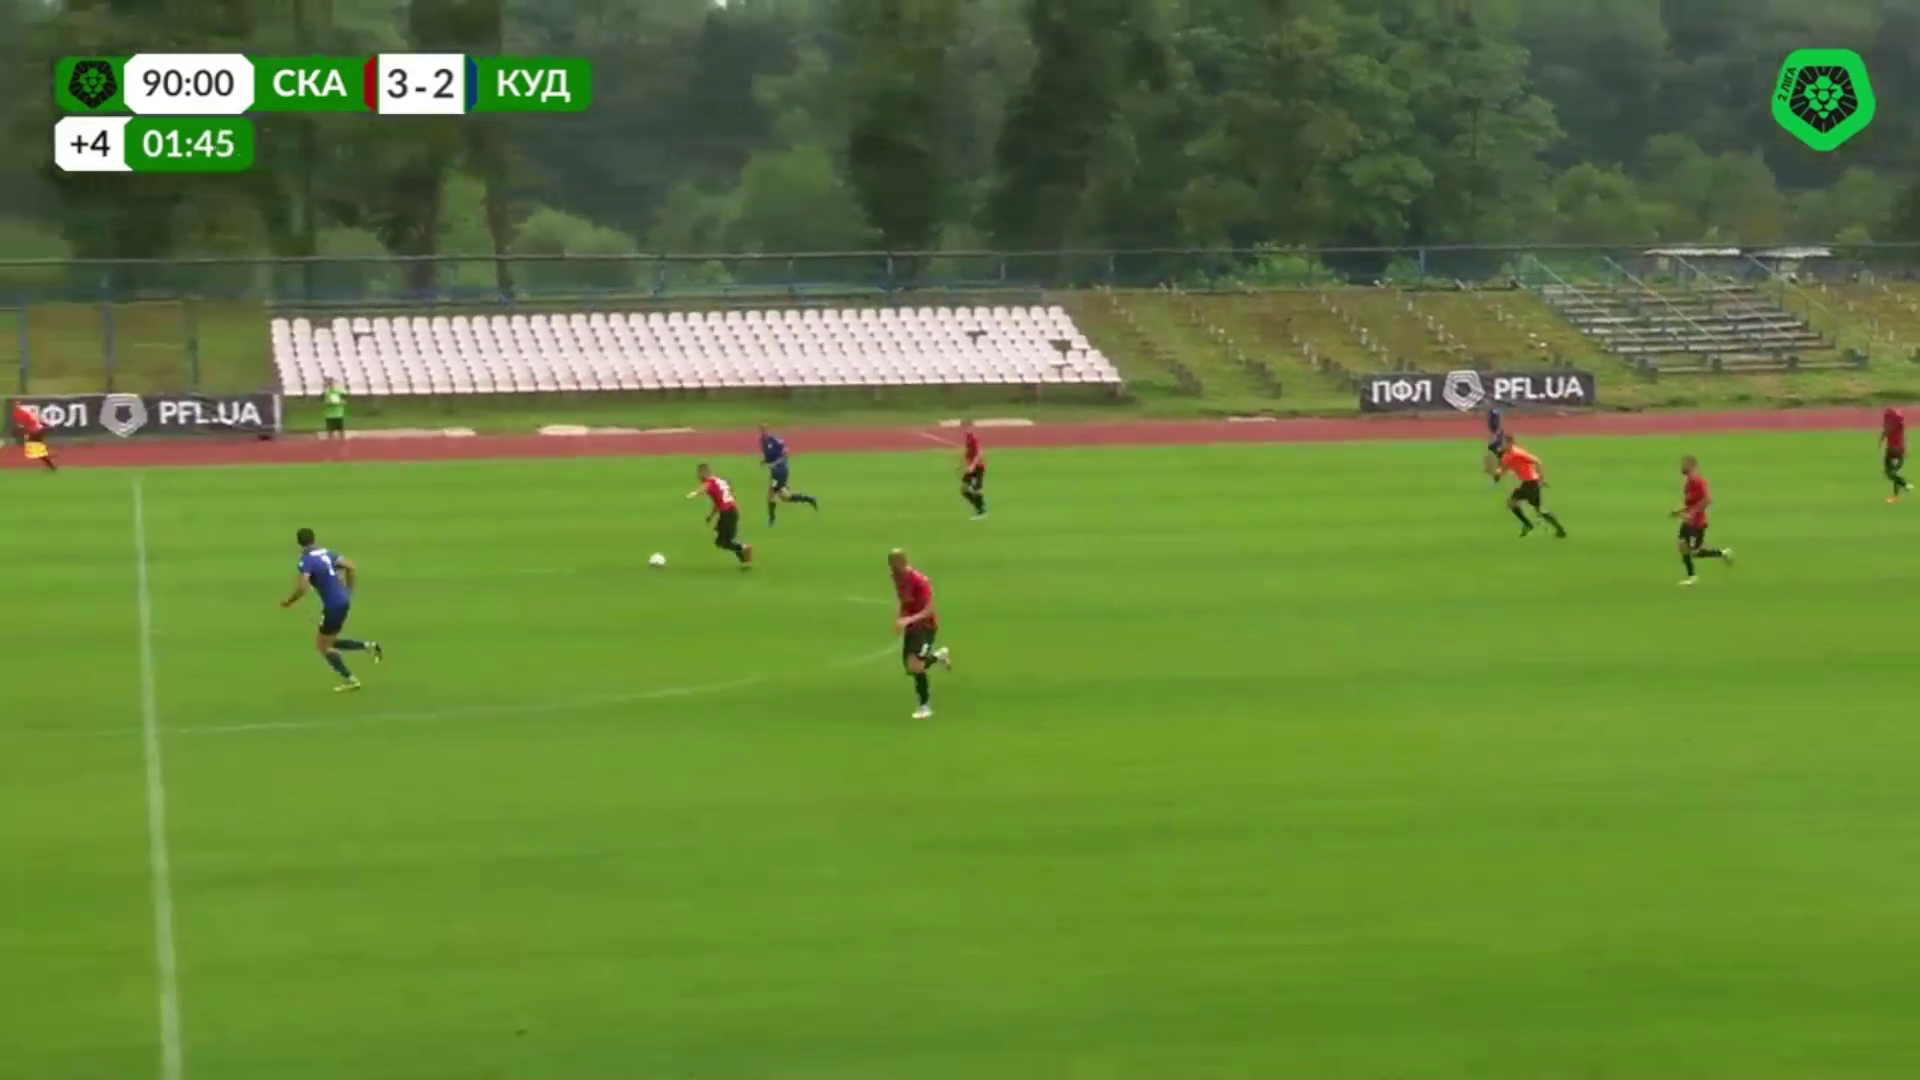 The Ukrainian footballer scored a stunning goal from his own half of the field. Video